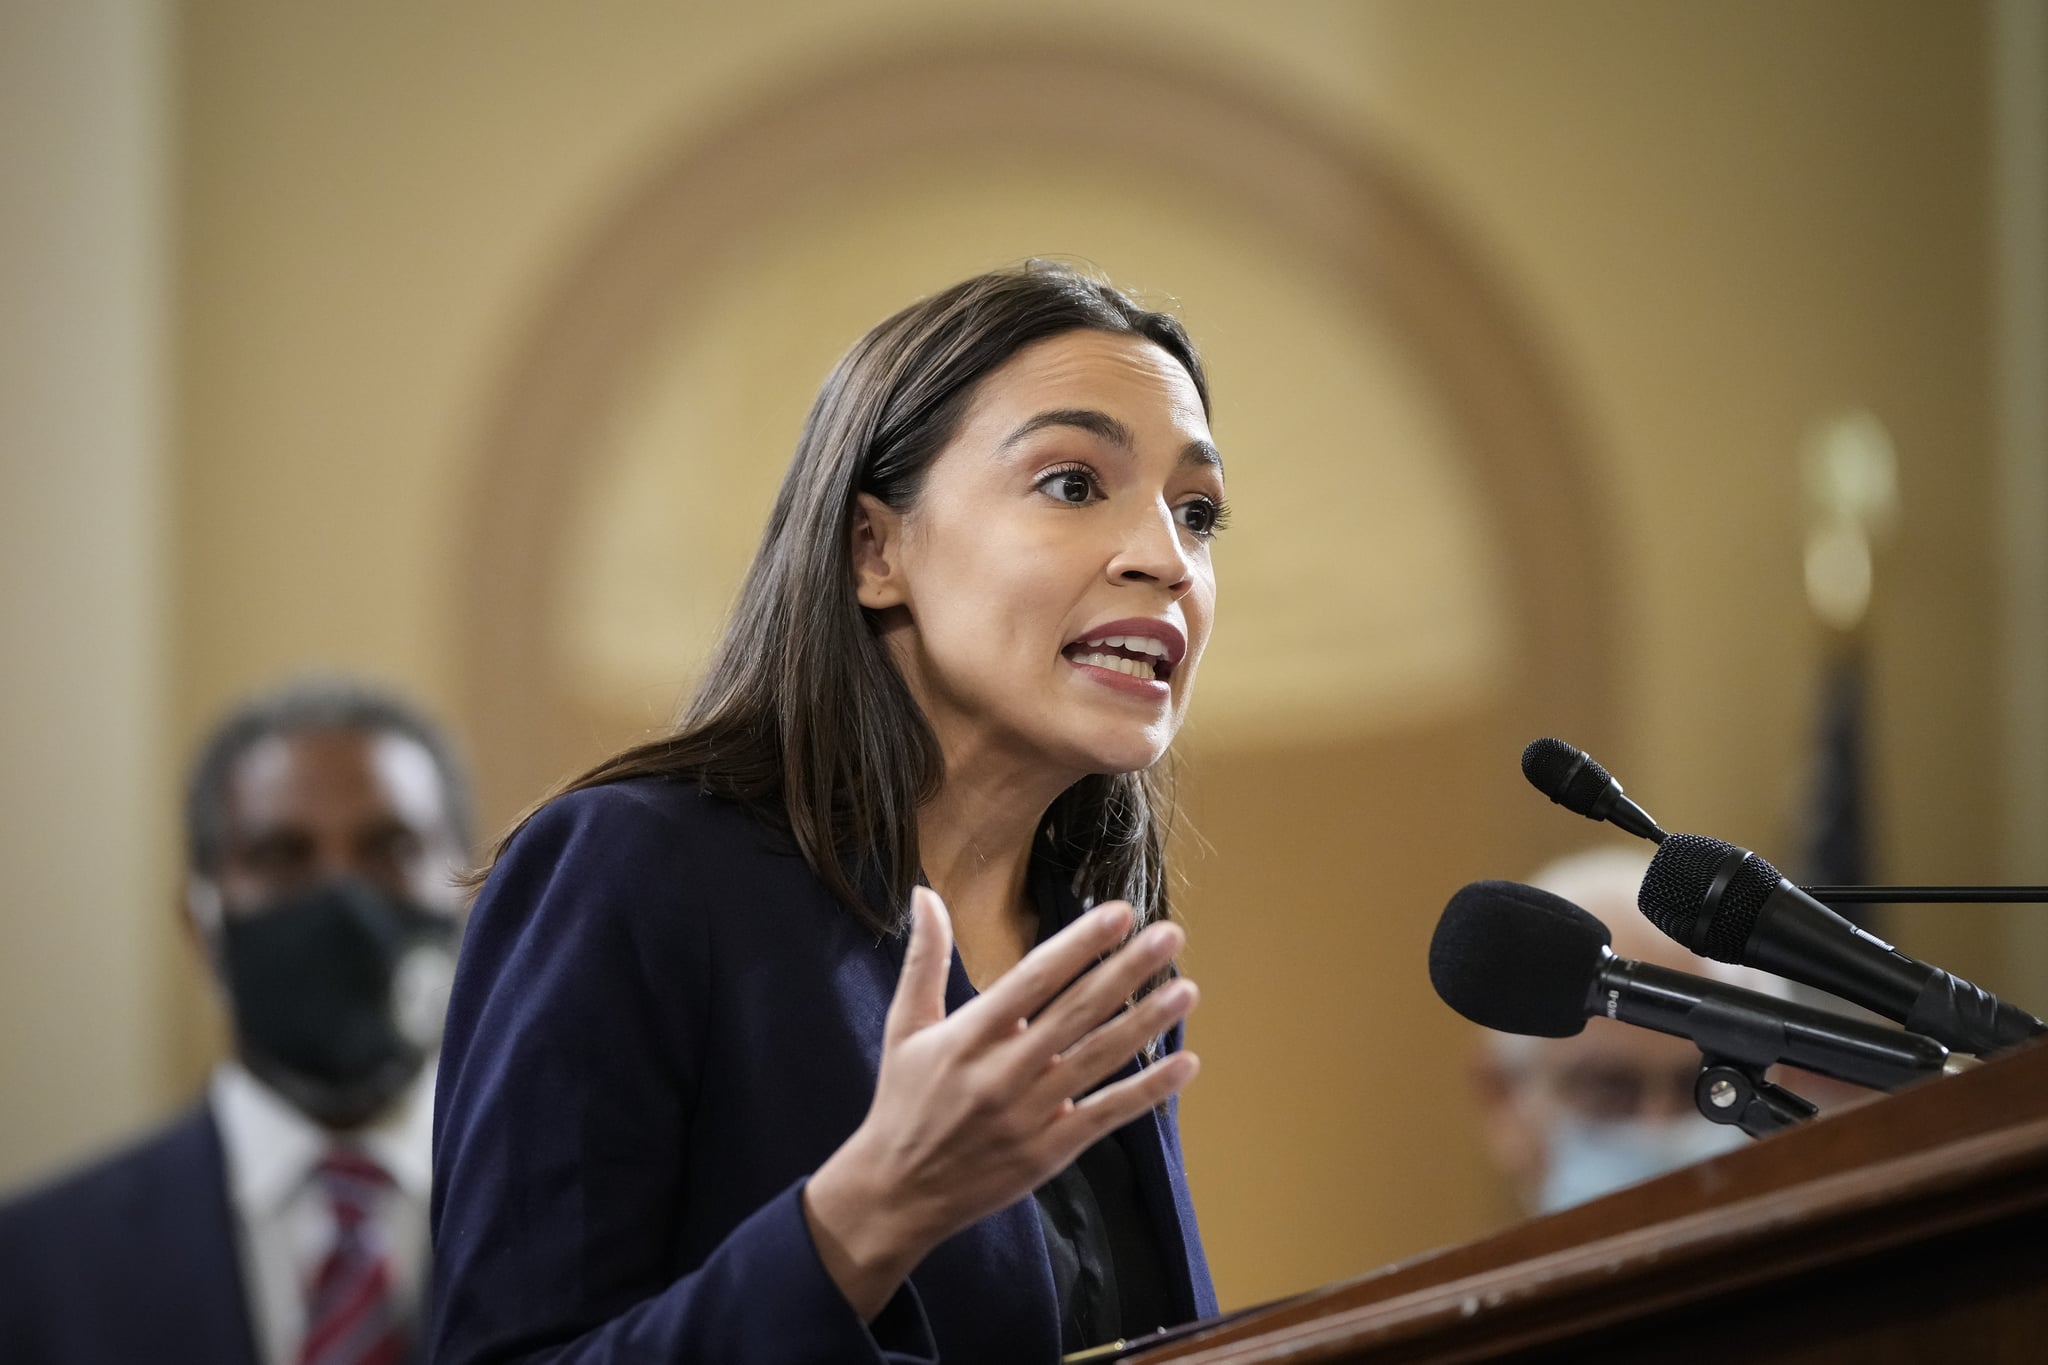 Rep. Alexandria Ocasio-Cortez speaks at news conference on October 26, 2021 in Washington, DC